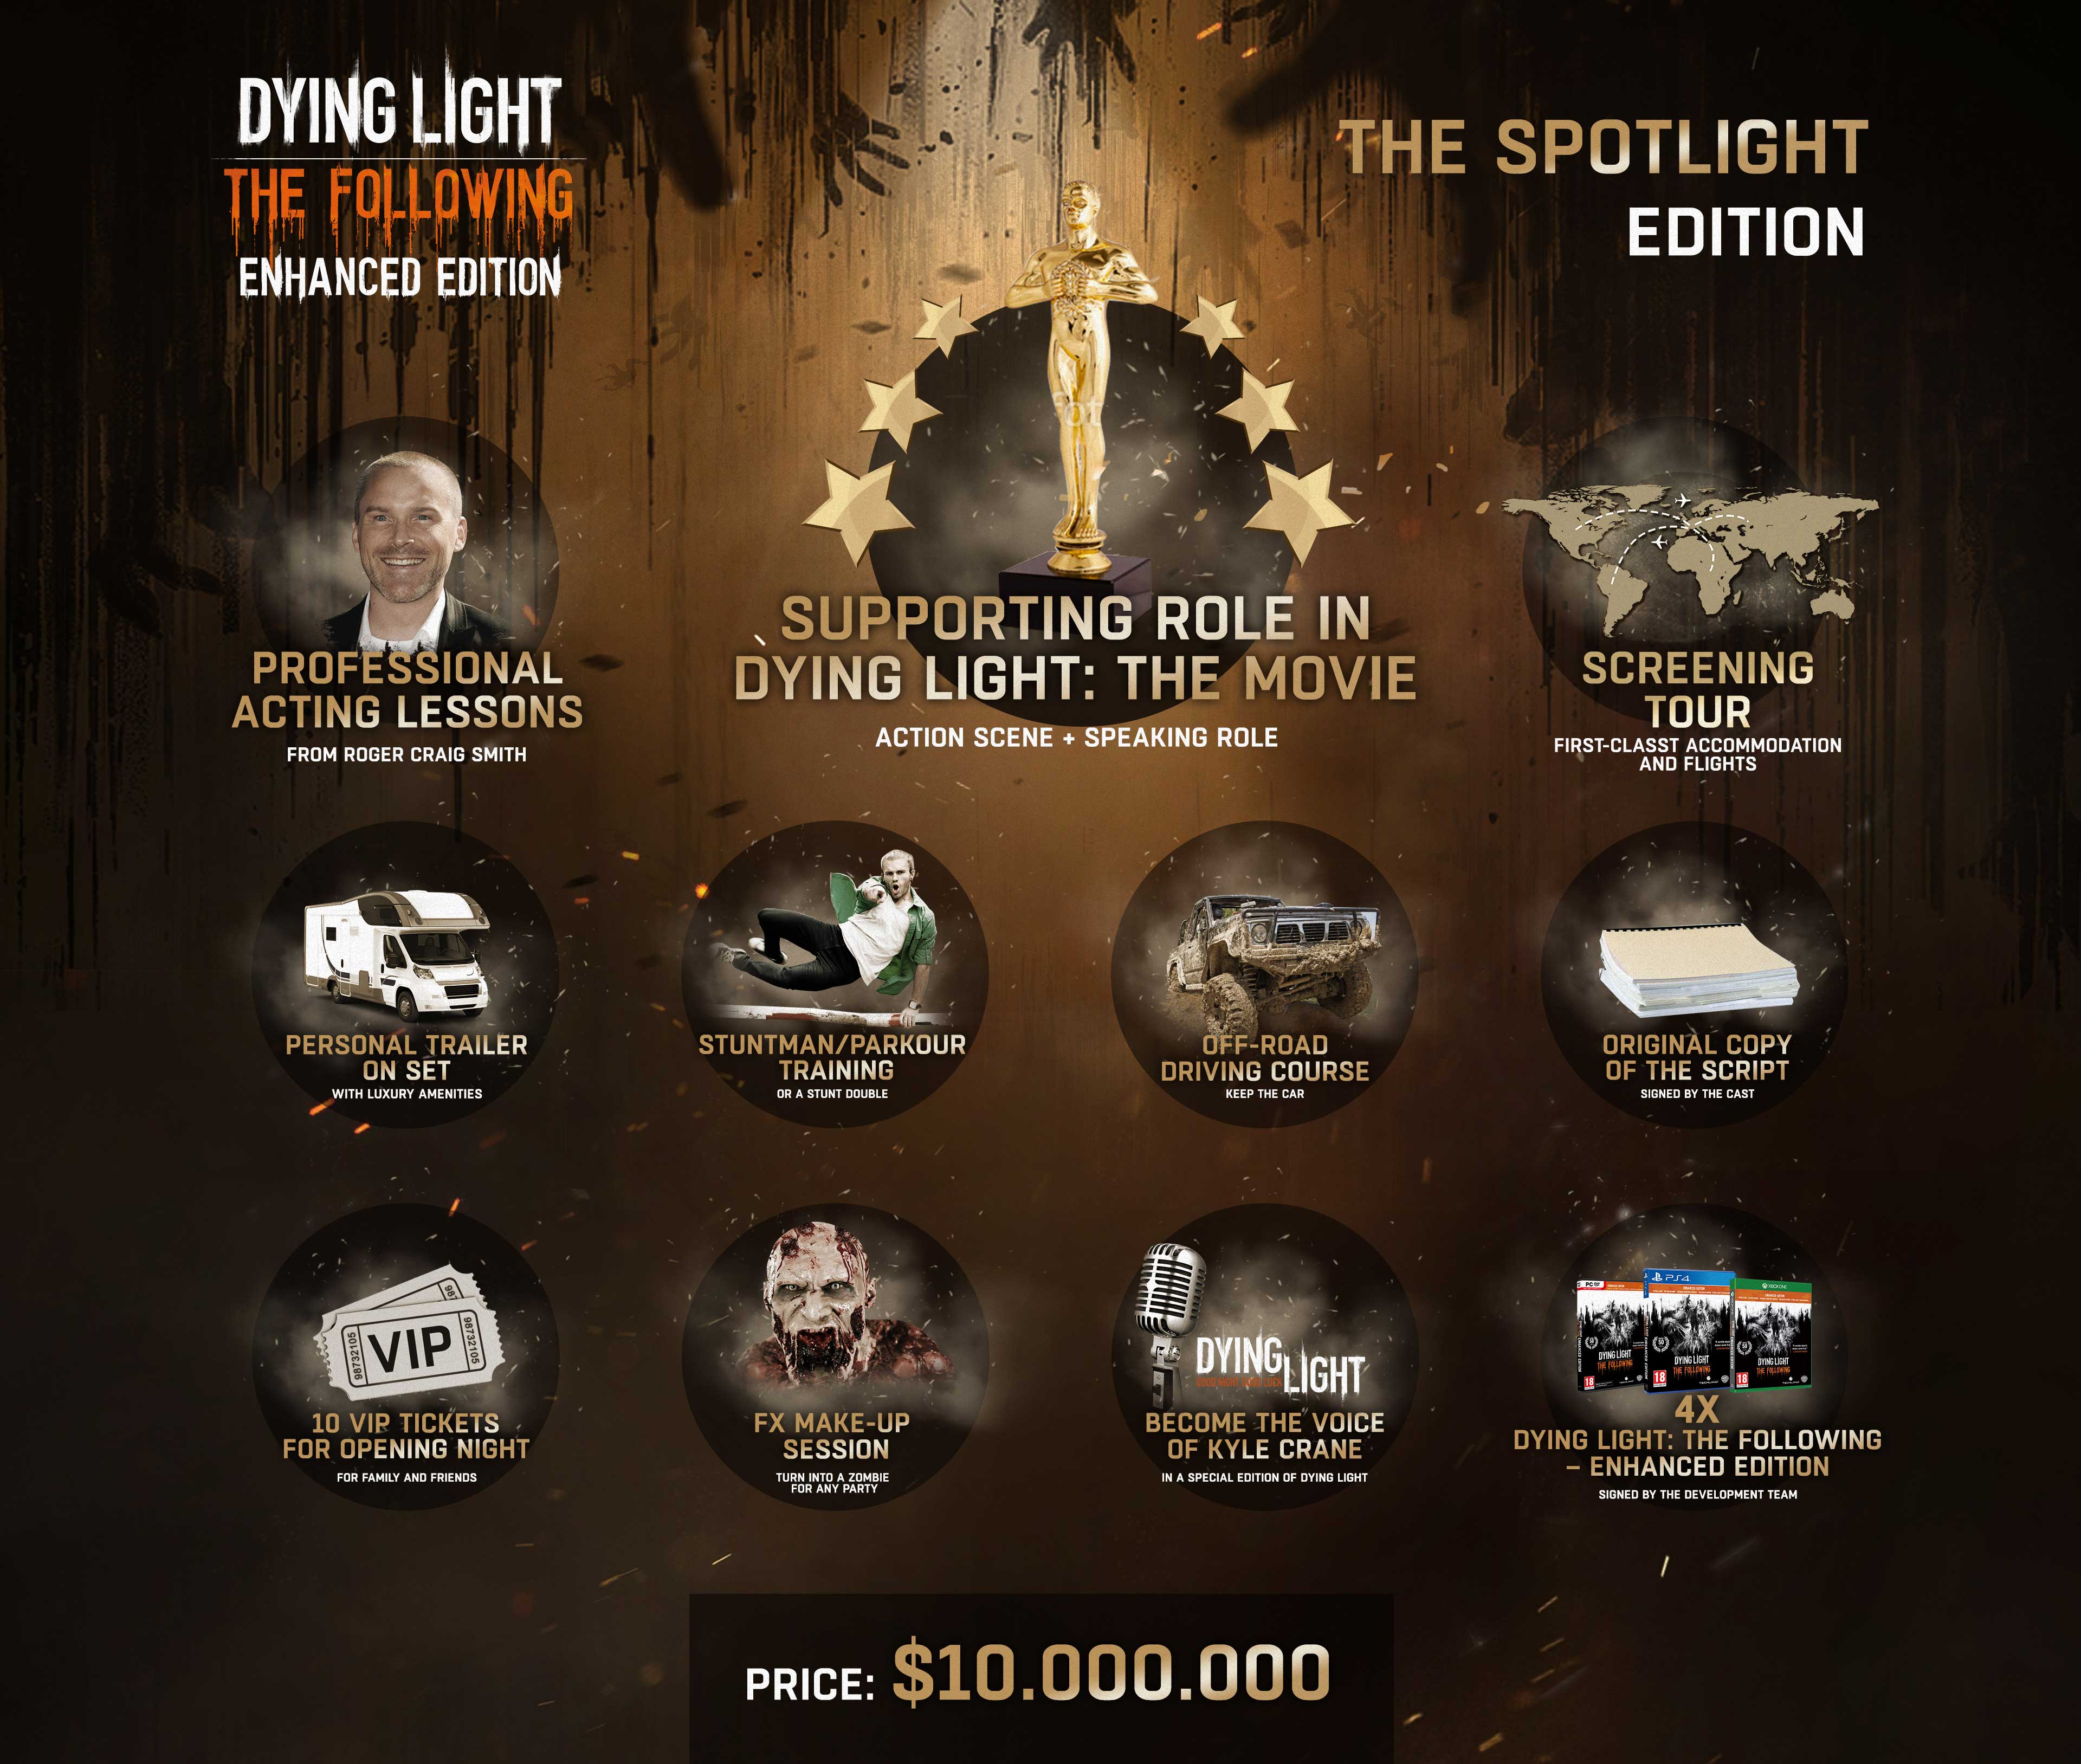 Image for $10M Dying Light Spotlight Edition includes speaking role in movie